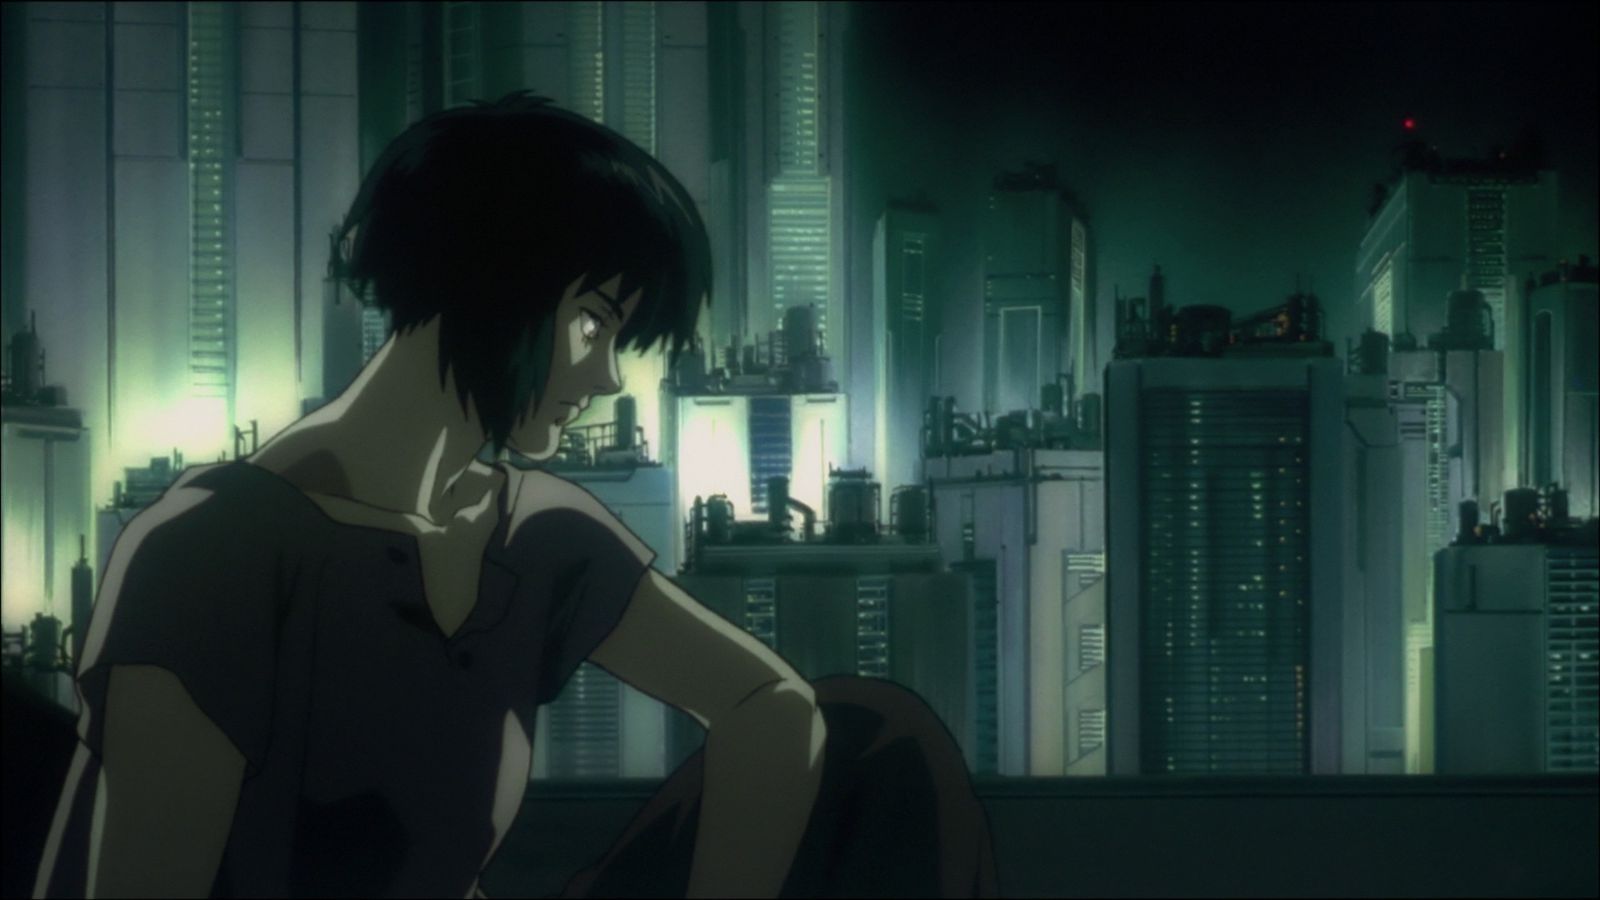 an animated image of a woman sitting in profile against a gloomy grey cityscape